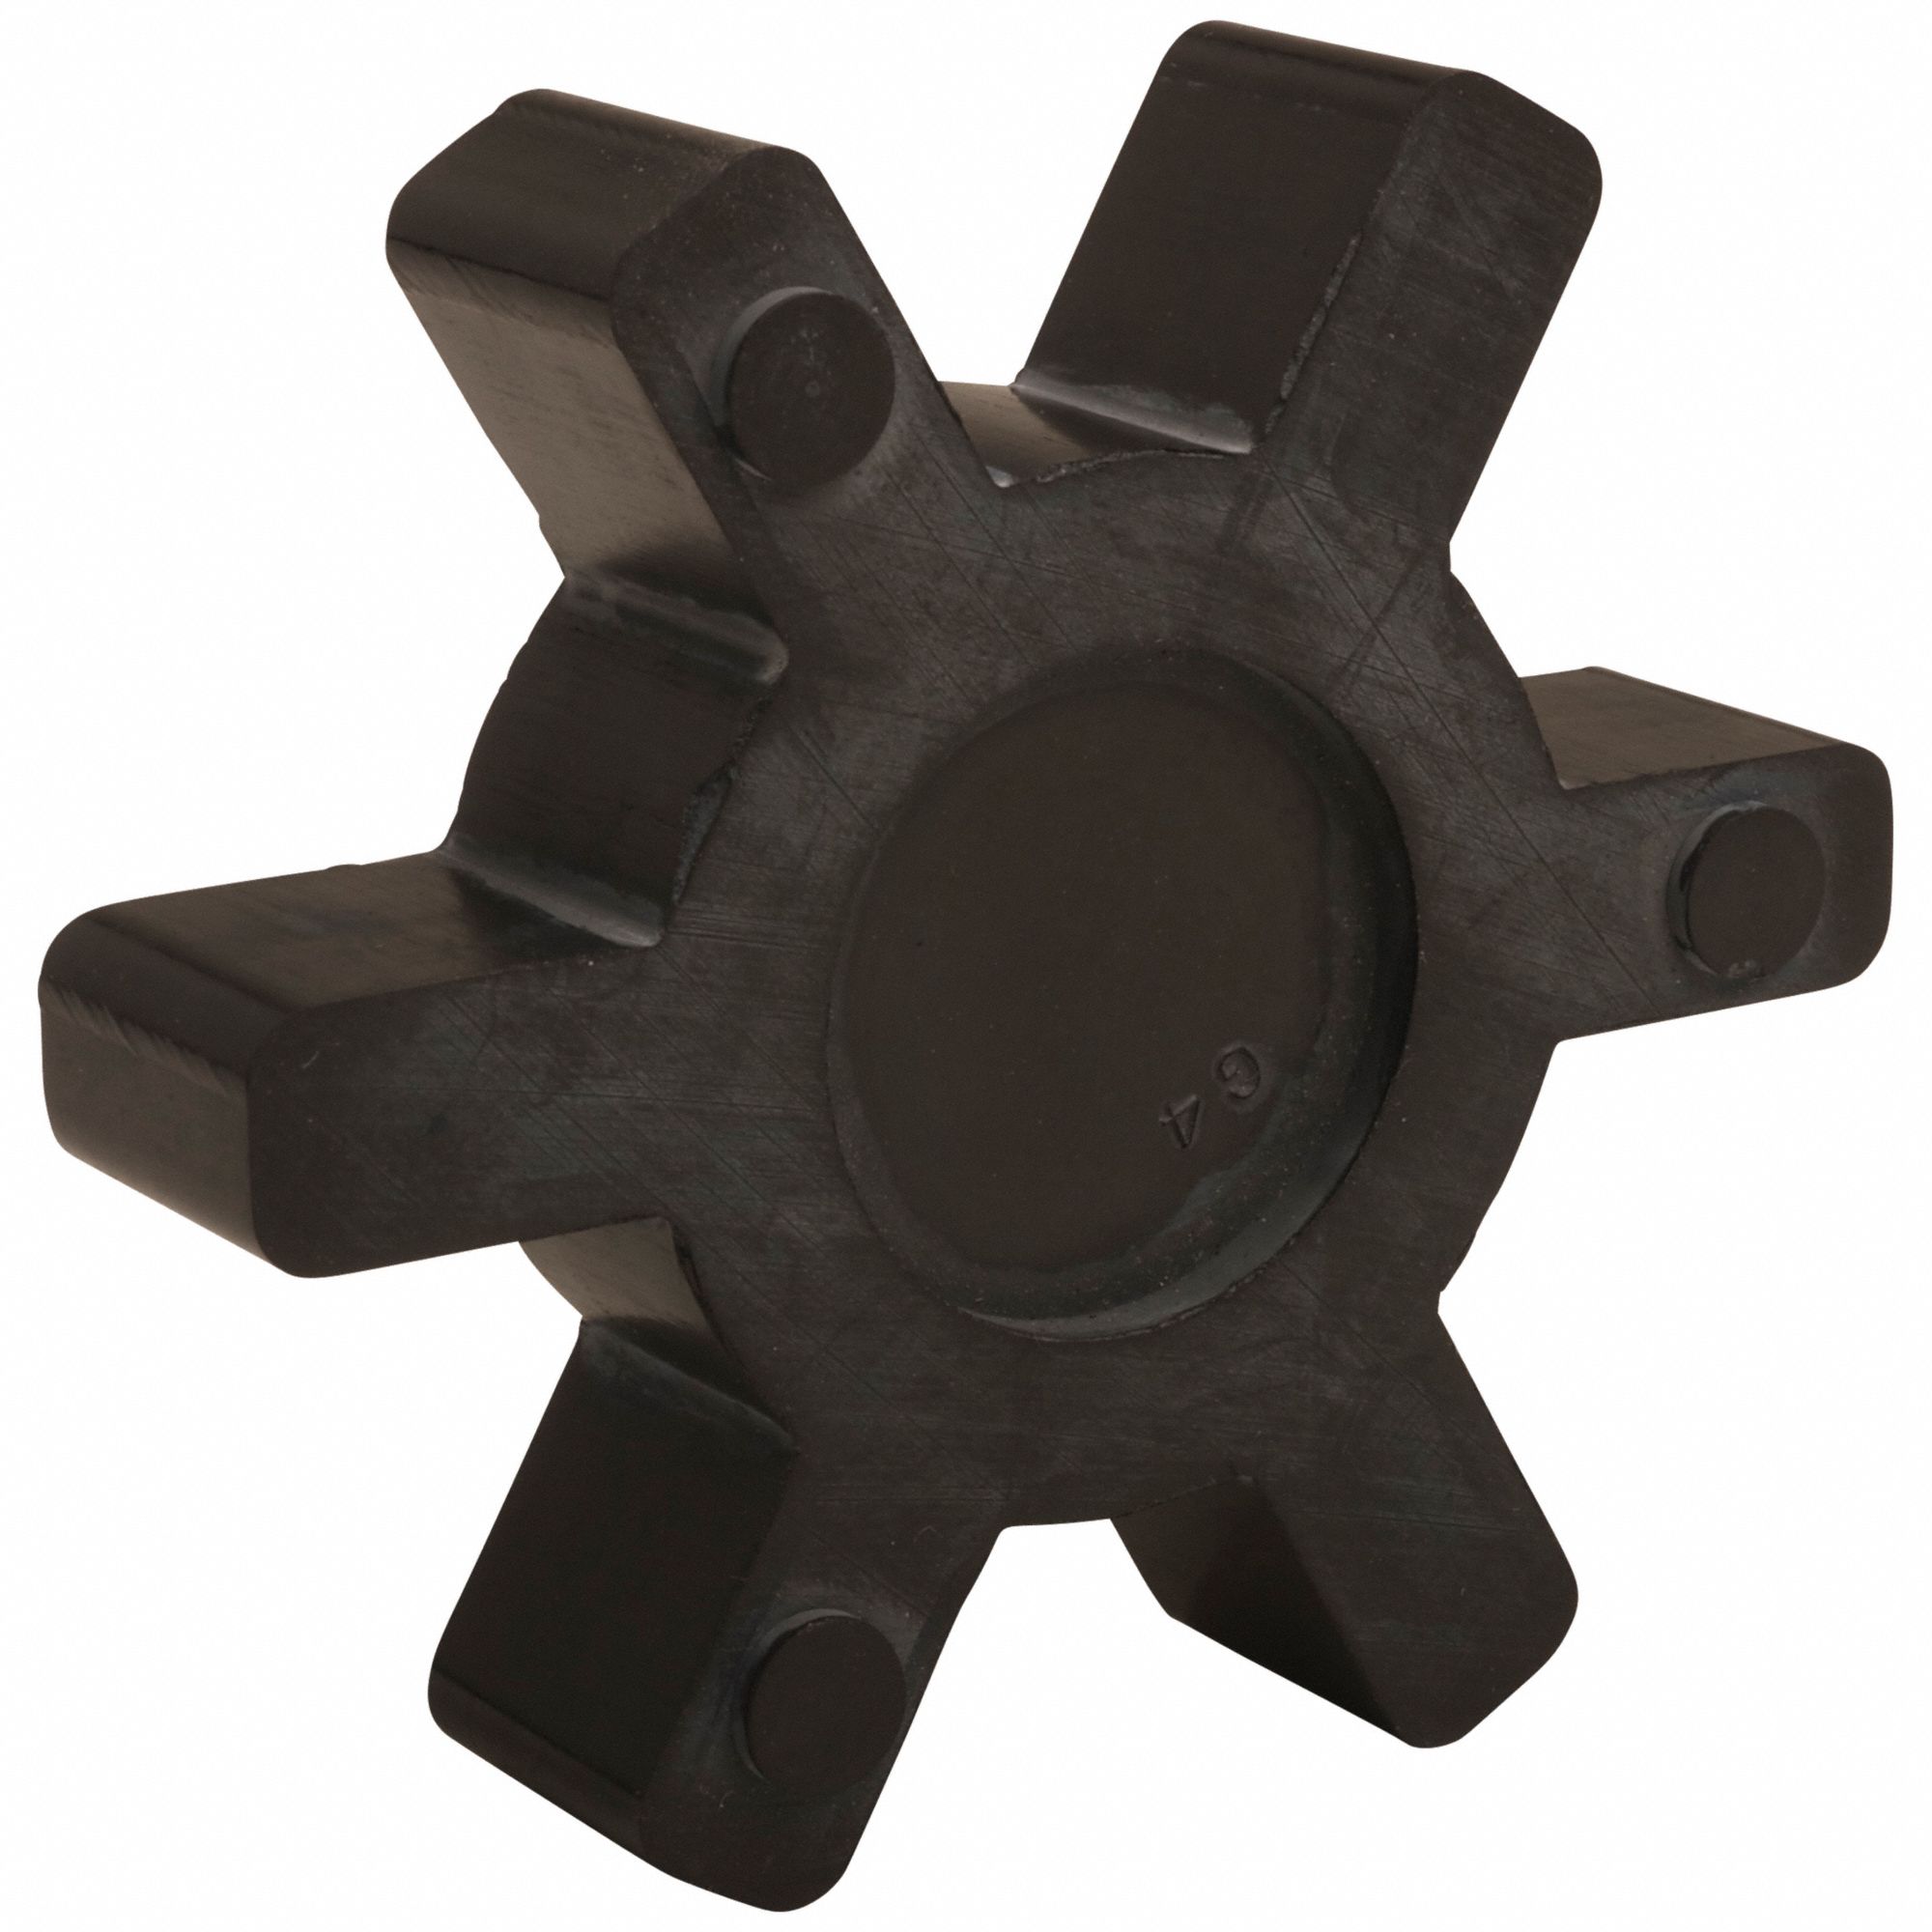 TB WOOD'S Buna N Spider Insert: L225 Coupling Size, 4 31/32 in Outside Dia,  Inch, 3.7 hp, Buna-N